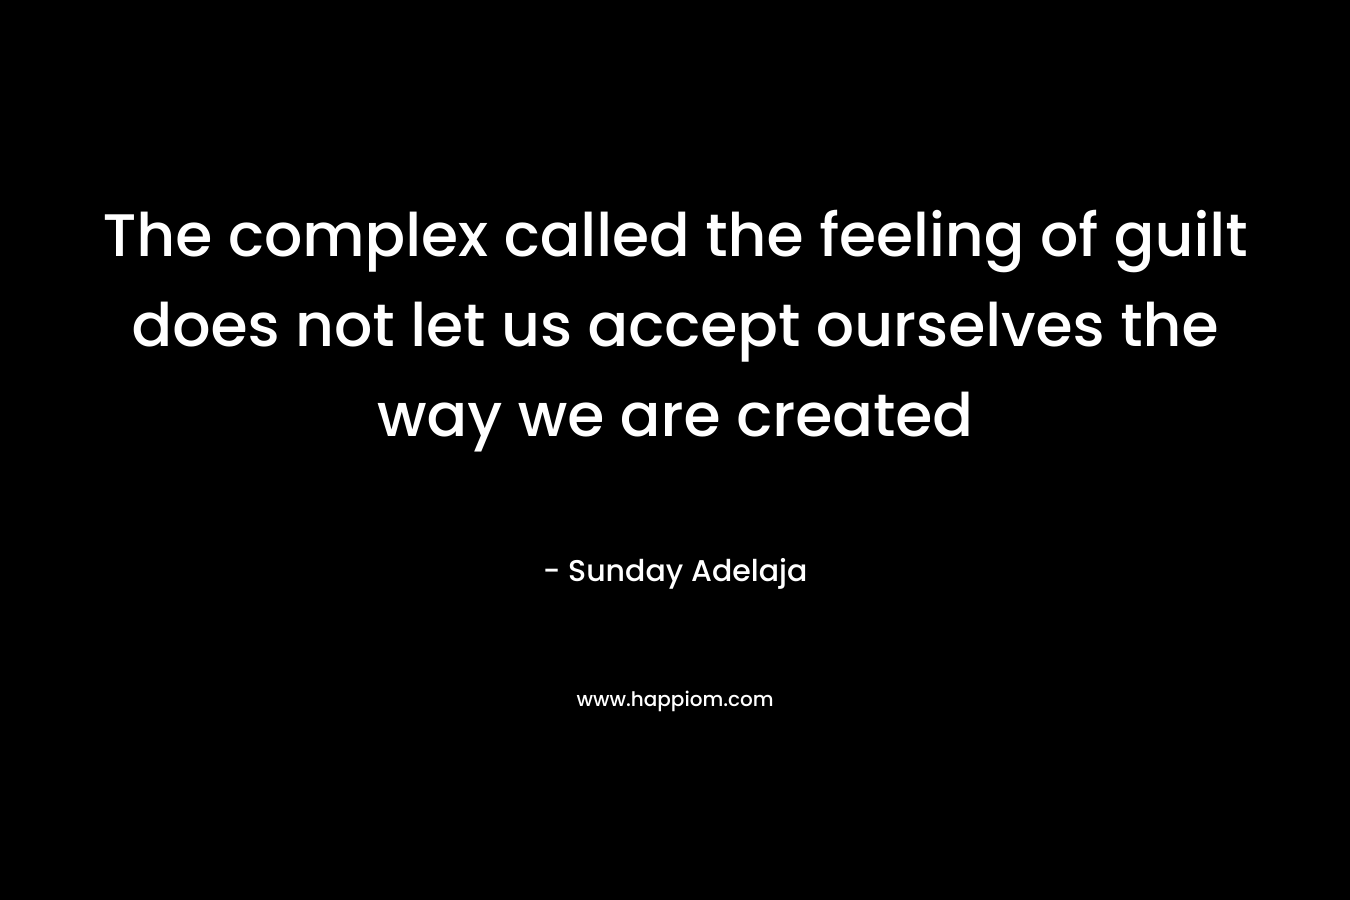 The complex called the feeling of guilt does not let us accept ourselves the way we are created